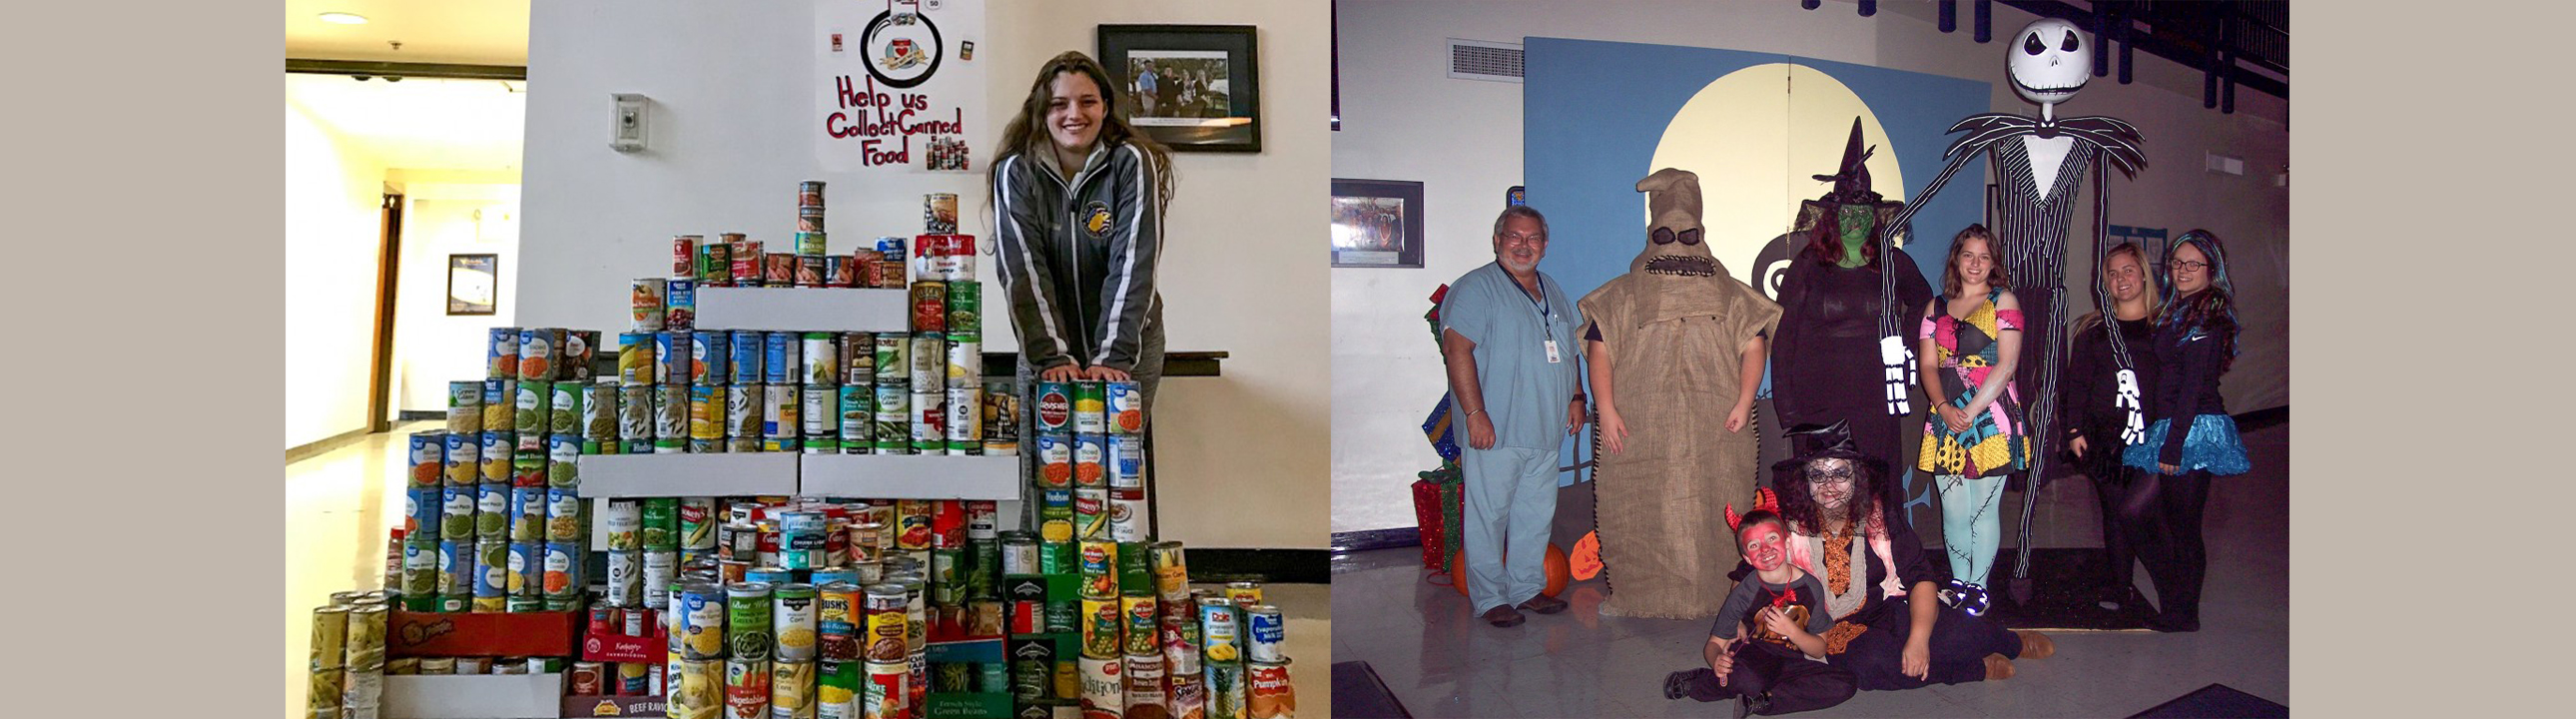 WVU Parkersburg Jackson County Center fundraising drives help save lives and feed the hungry